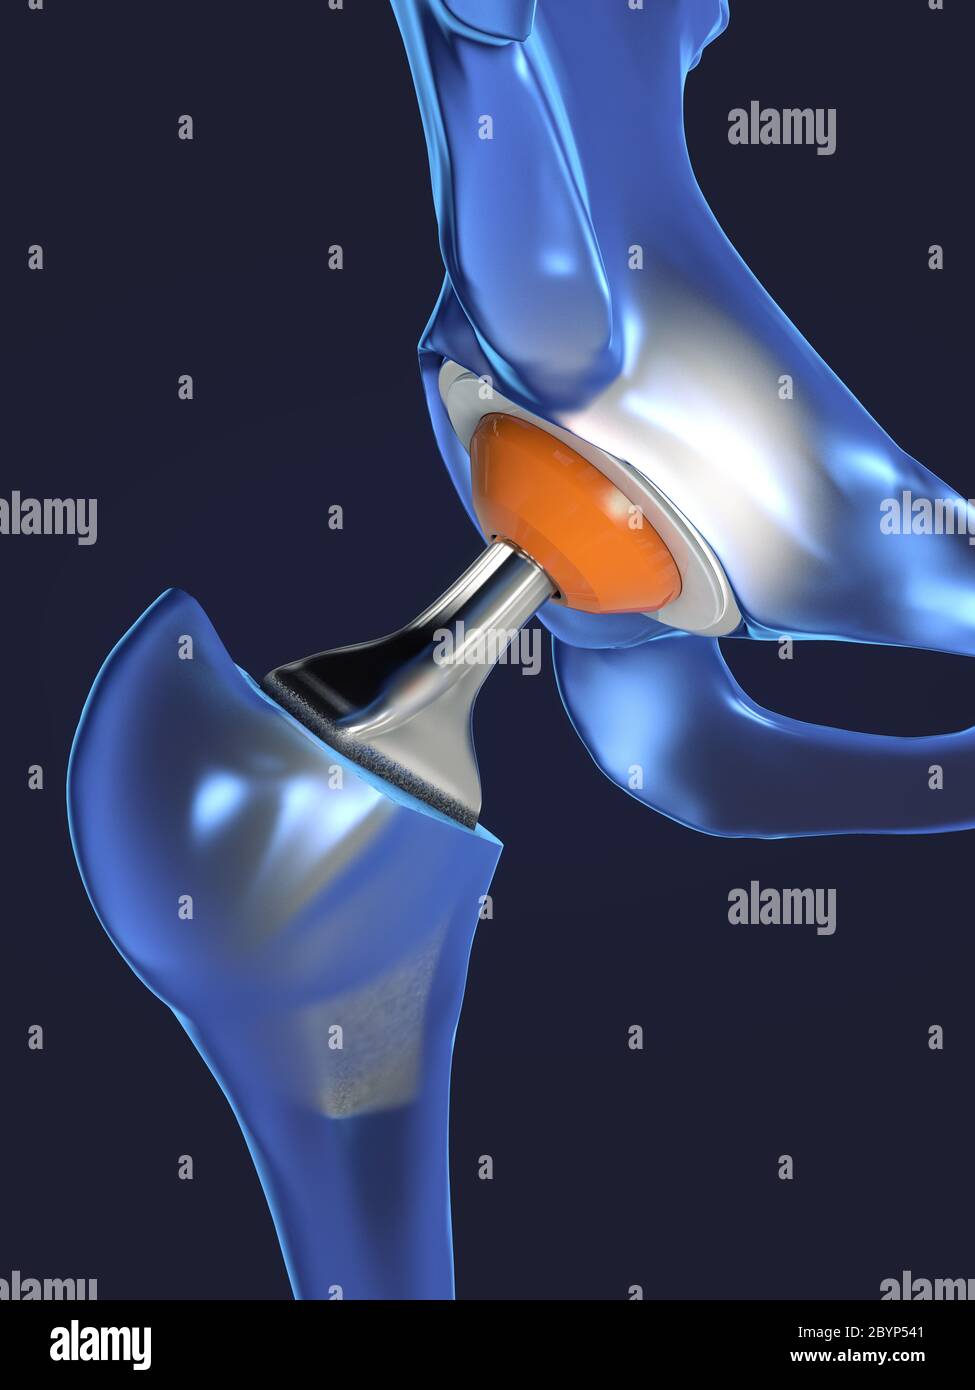 Function of a hip joint implant or hip prosthesis in frontal view - 3d illustration Stock Photo